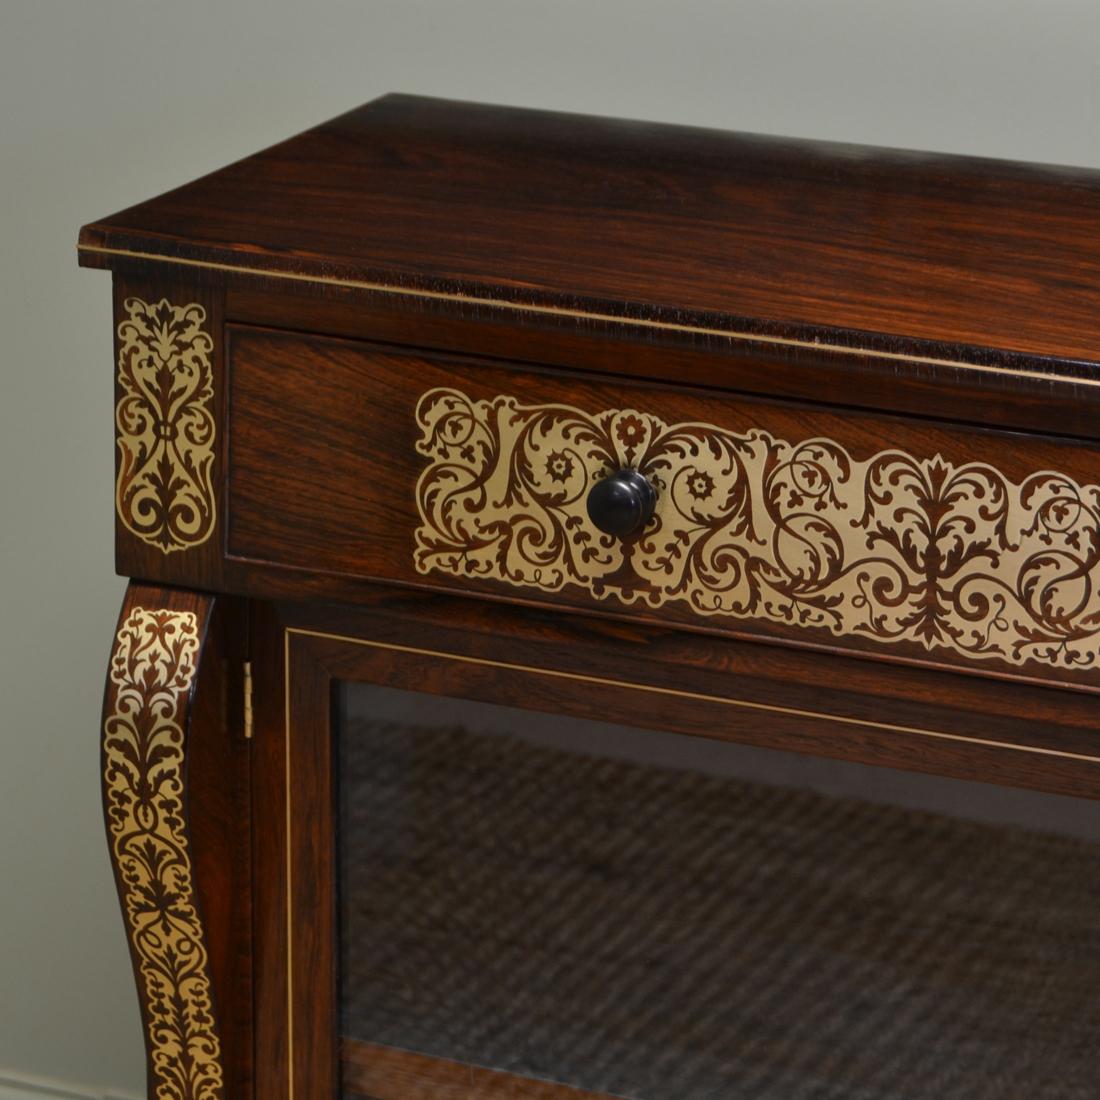 Regency Rosewood Brass Inlaid Antique Secretaire Cabinet In Good Condition For Sale In Link 59 Business Park, Clitheroe